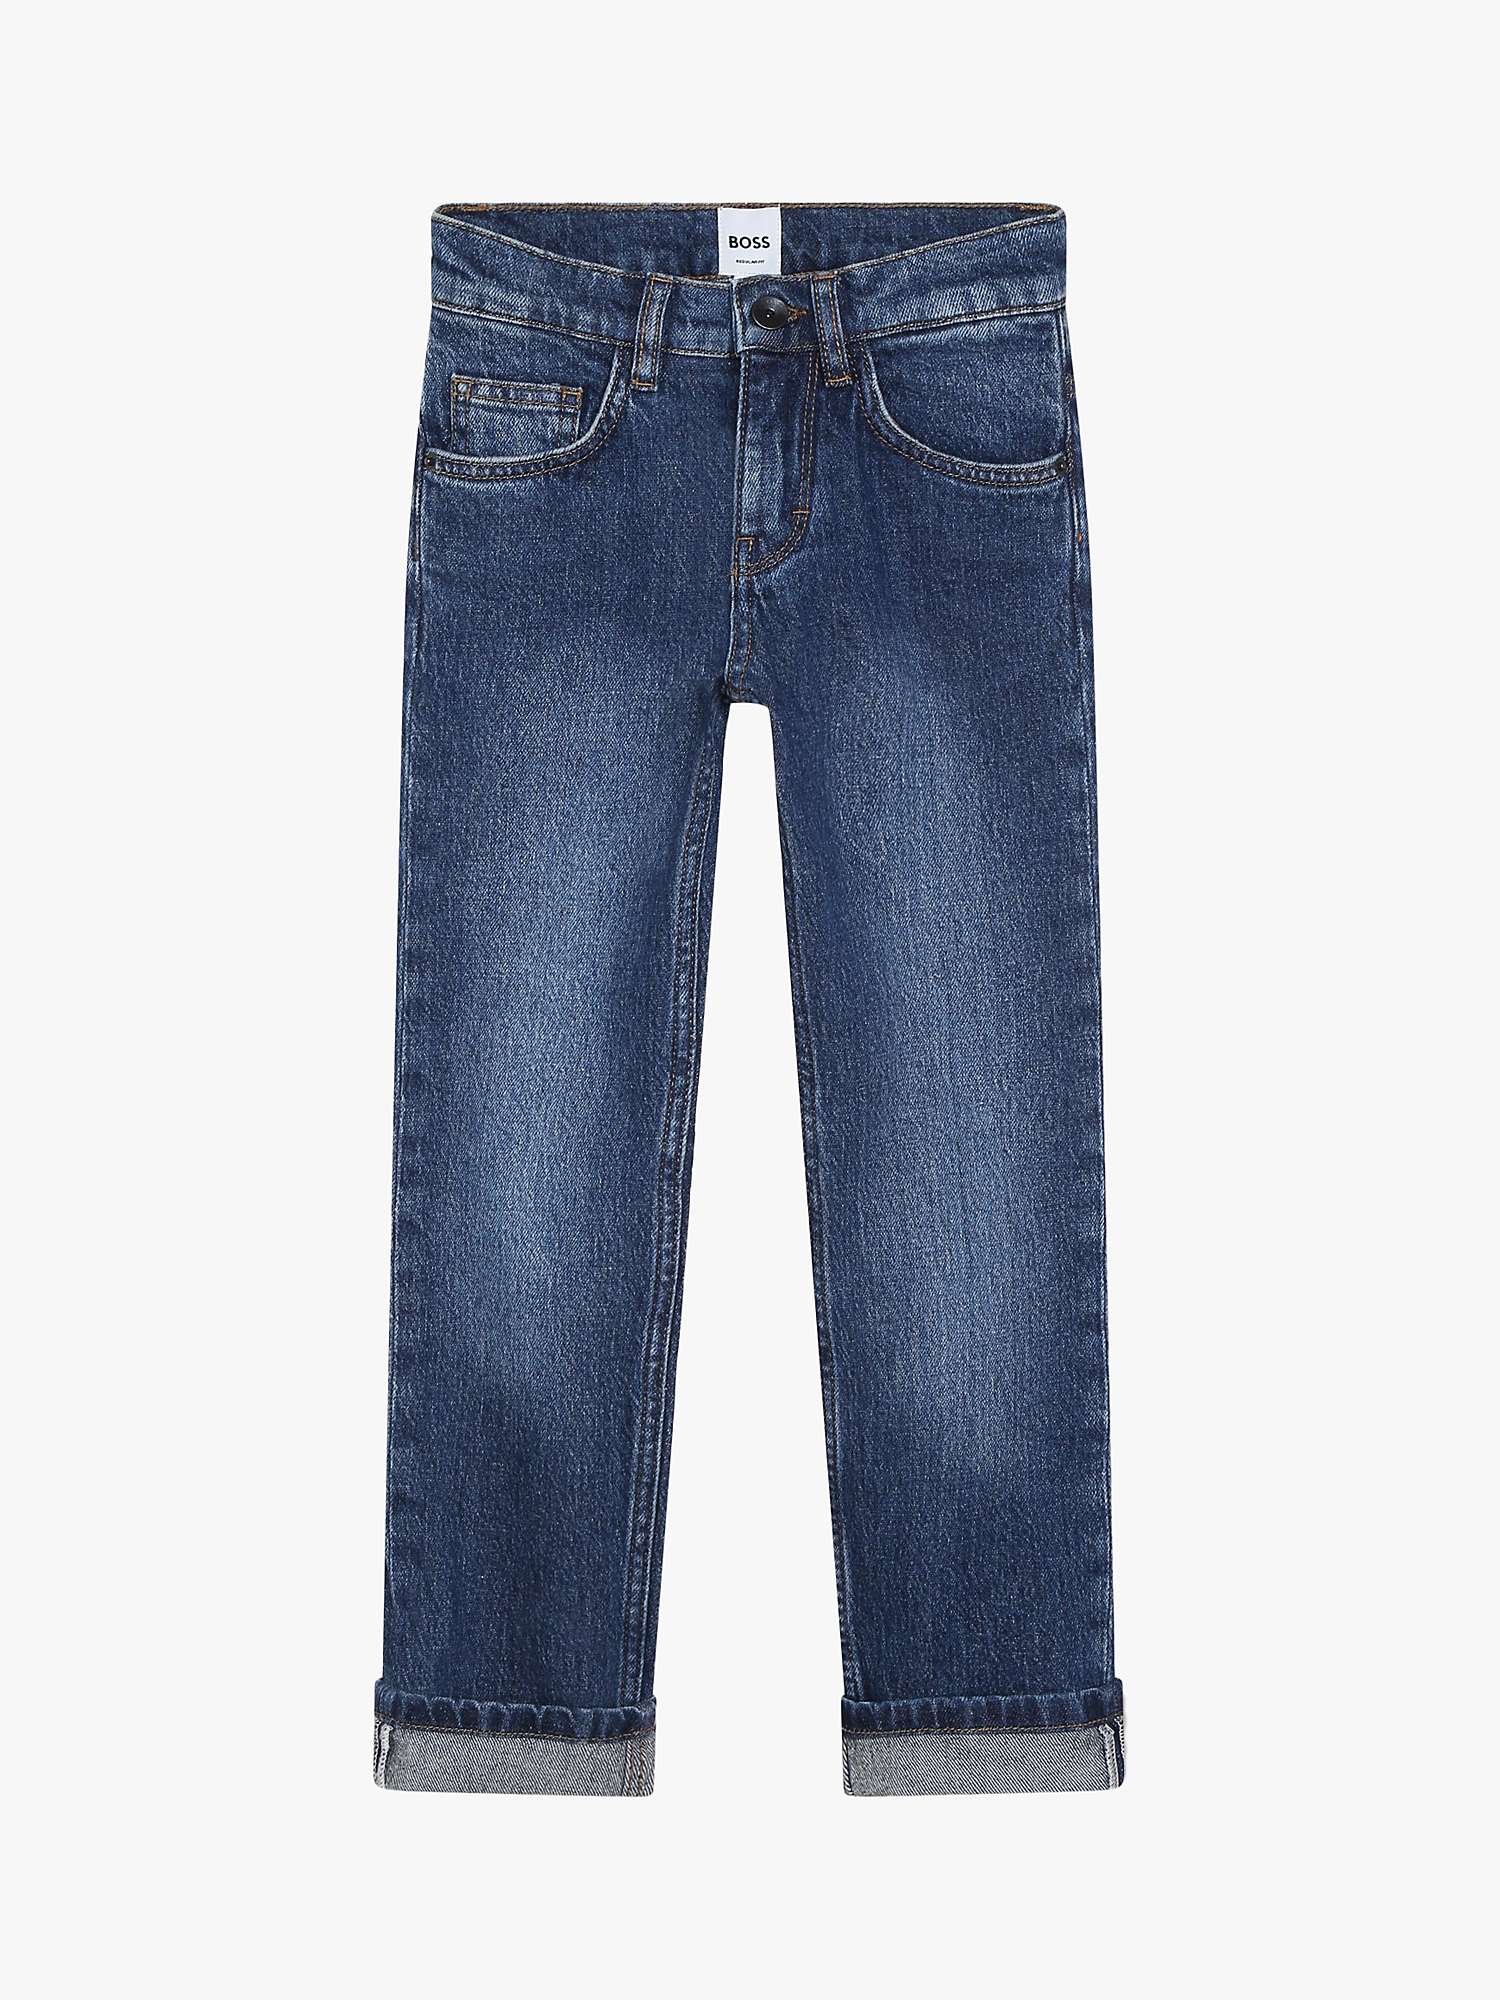 Buy BOSS Kids' Straight Fit Jeans, Blue Online at johnlewis.com